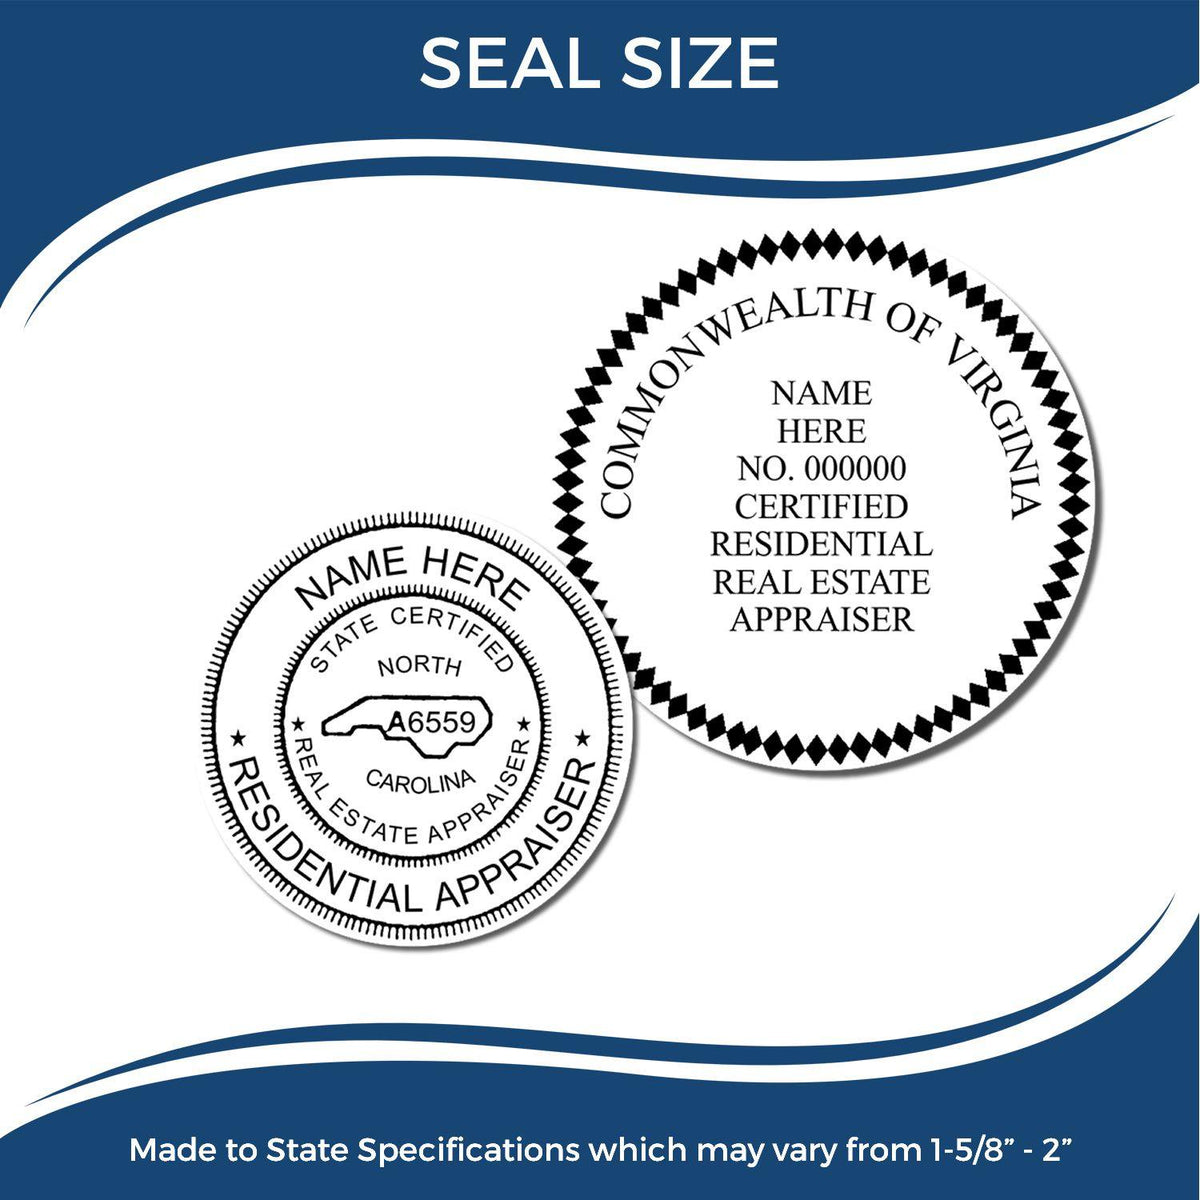 Real Estate Appraiser eSeal Electronic Image Stamp of Seal - Engineer Seal Stamps - Stamp Type_Electronic, Type of Use_Professional